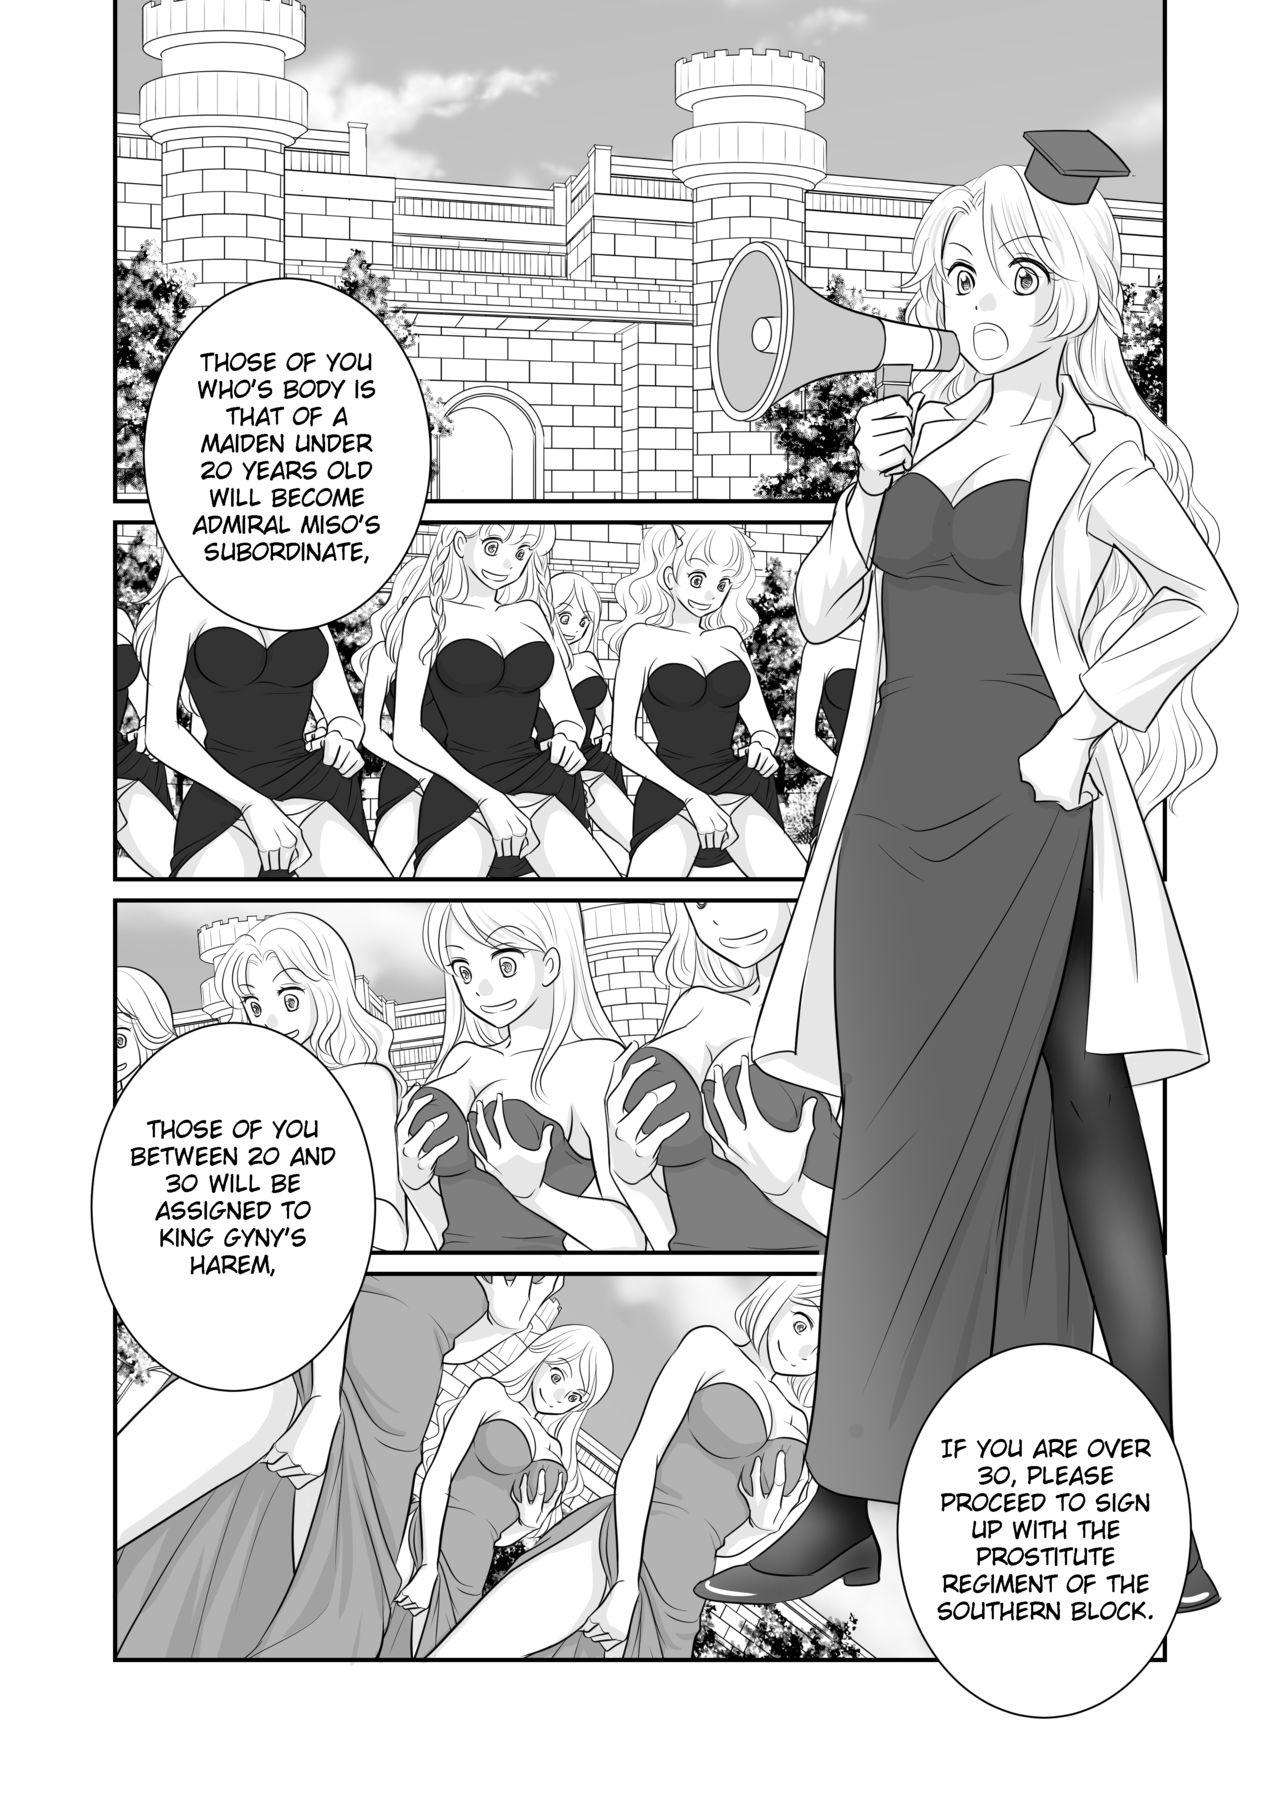 Misogyny Conquest Chapter 4 4